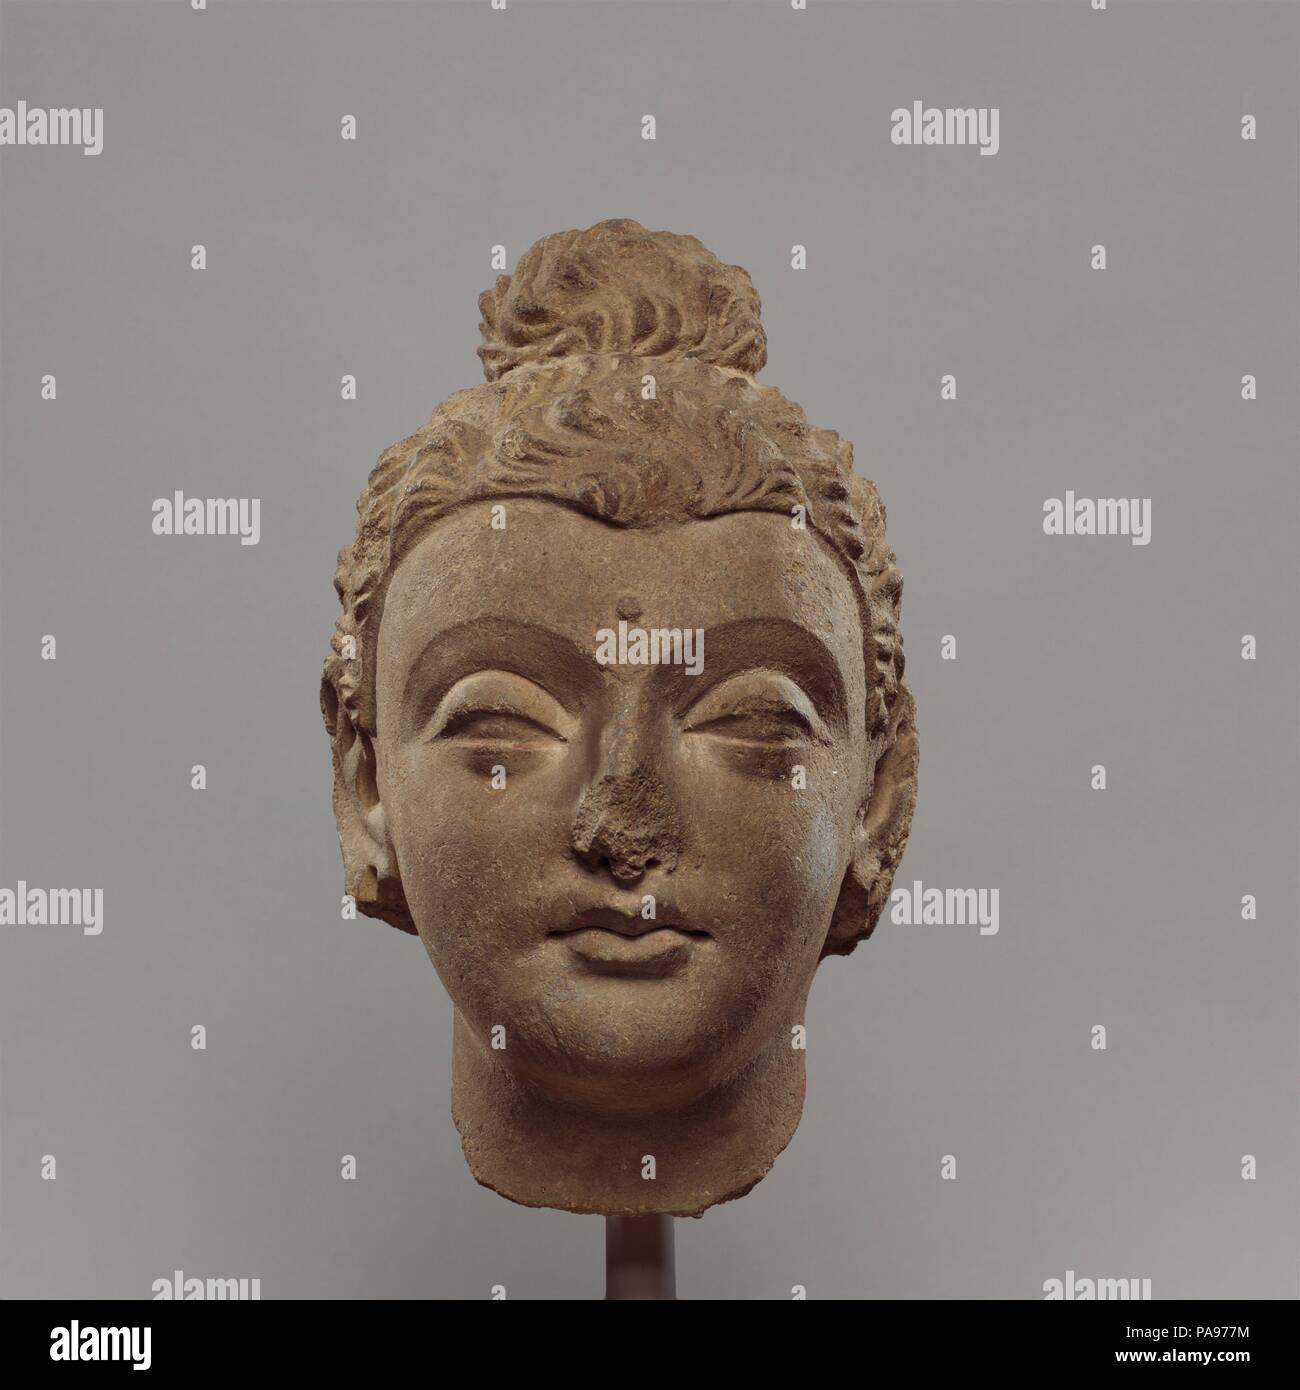 Head of Buddha. Culture: Pakistan (ancient region of Gandhara). Dimensions: H. 7 3/4 in. (19.7 cm); W. 4 1/2 in. (11.4 cm); D. 5 1/8 in. (13 cm). Date: ca. 4th century.  This head shows close stylistic affinities with early stucco production from Gandharan sites at Taxila. The sensitive modeling has an expressive quality that is not seen in the more formal images in stone from this period. Museum: Metropolitan Museum of Art, New York, USA. Stock Photo